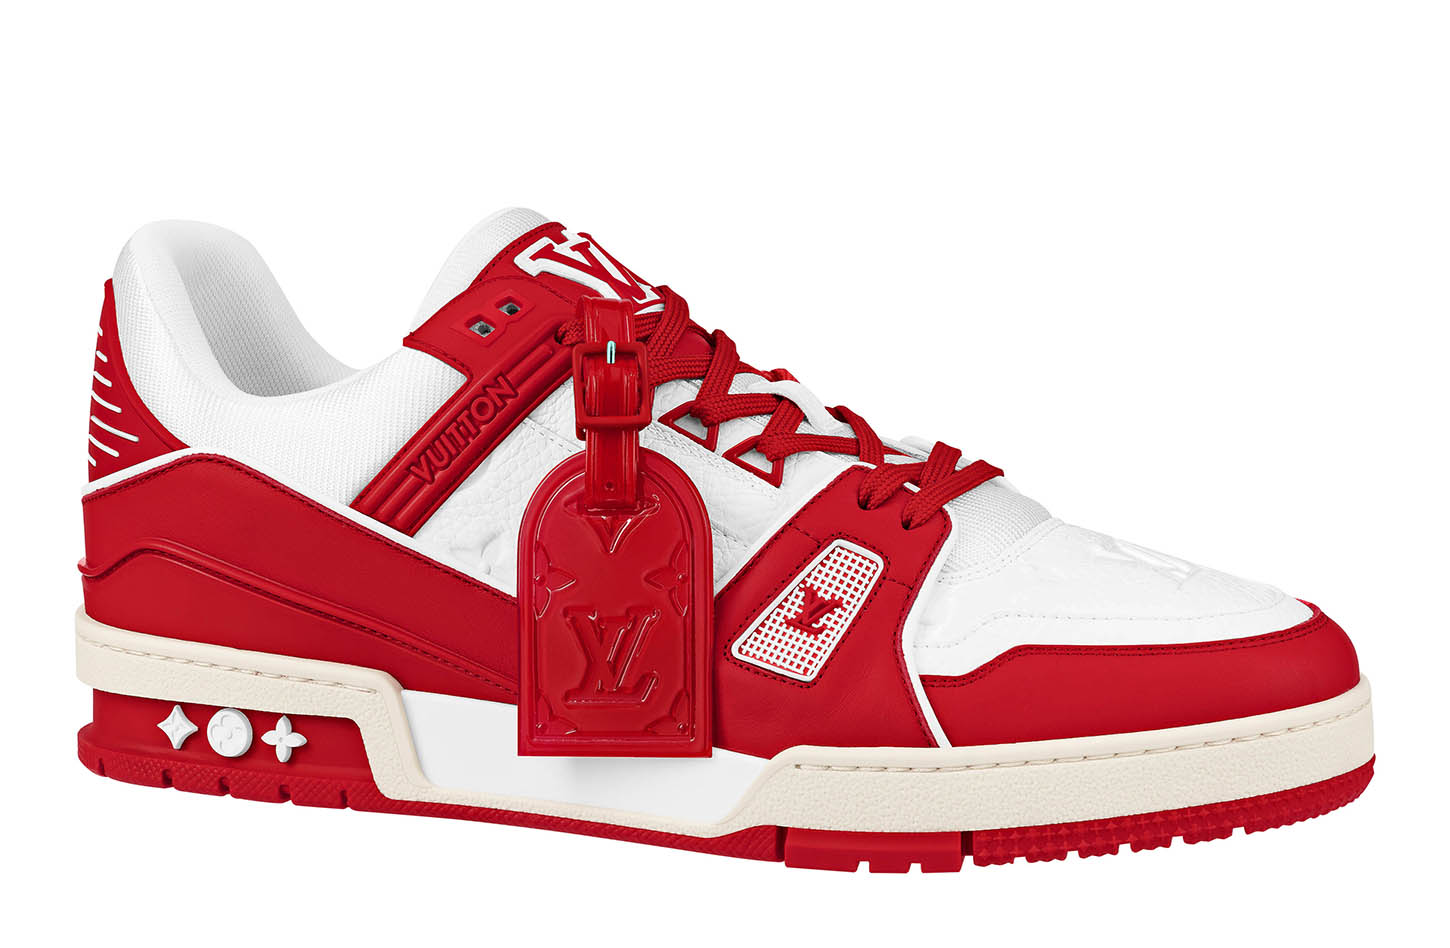 Louis Vuitton and (RED) Present The Louis Vuitton I (RED) Trainer in Support of the Fight to End AIDS